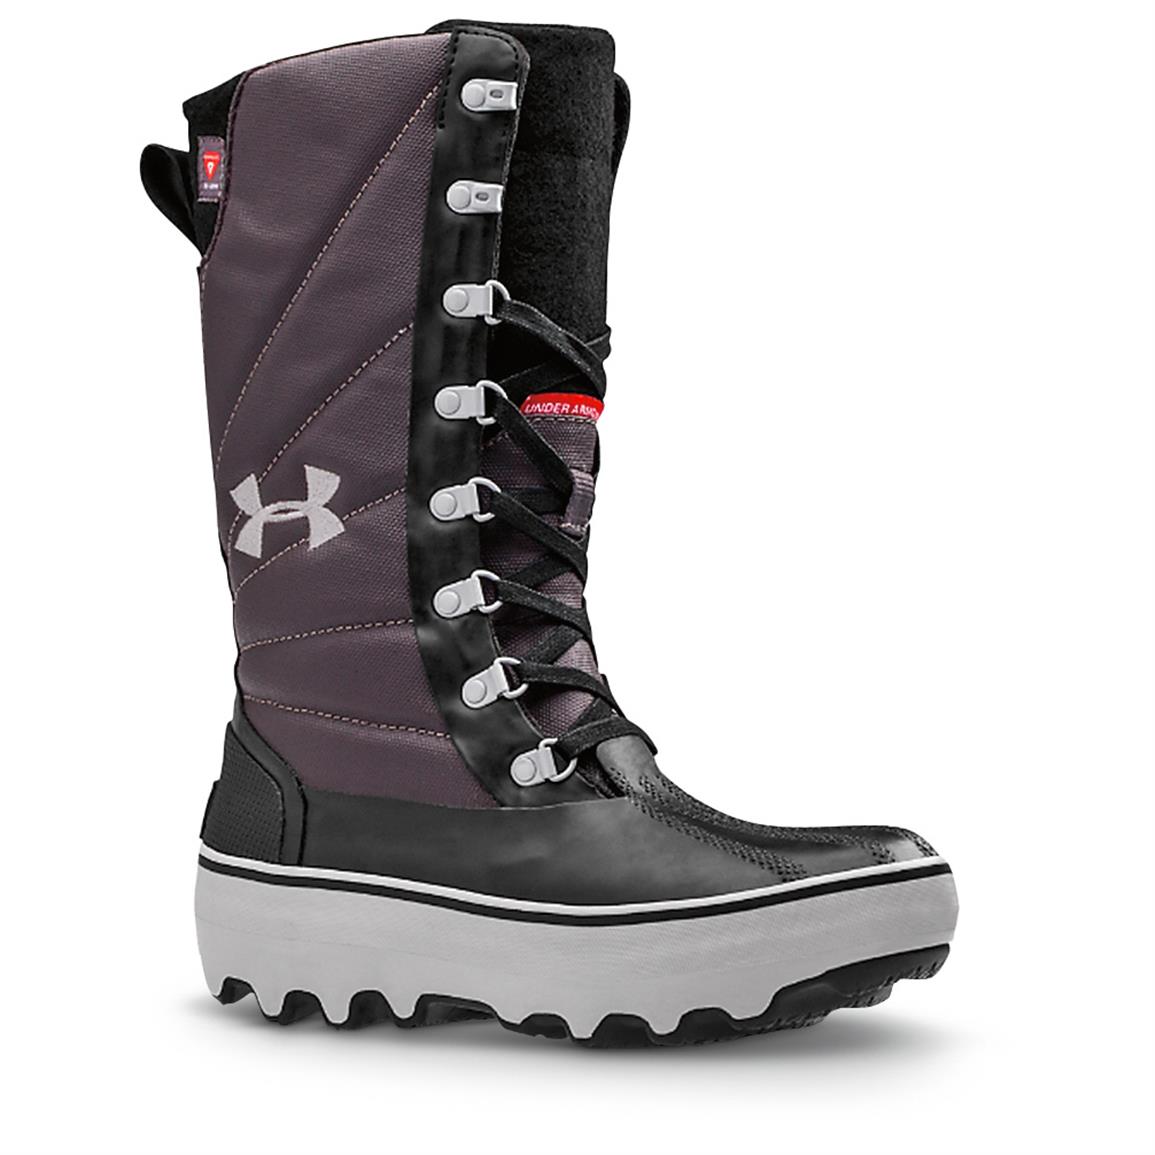 Cheap under armour insulated boots Buy 